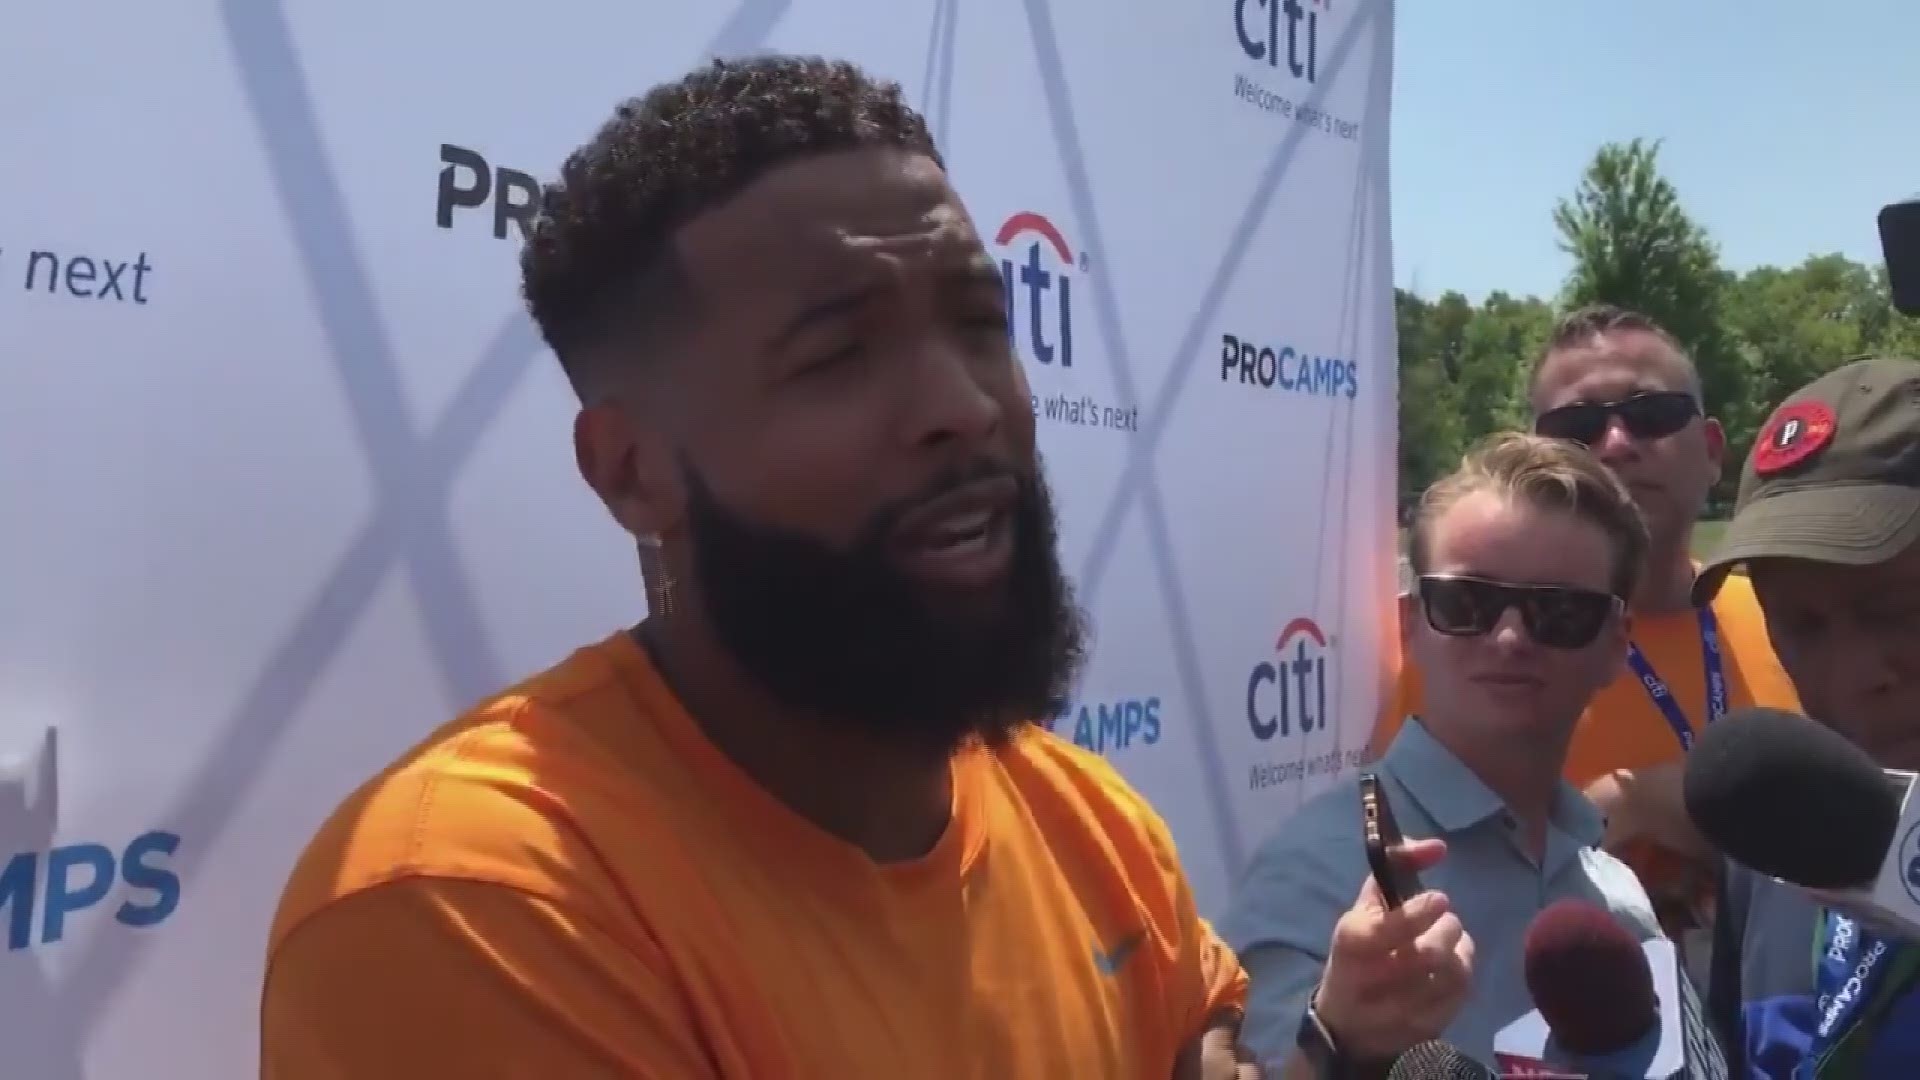 The Cleveland Browns are just days away from opening training camp, and wide receiver Odell Beckham Jr. believes the team is on the rise after years of struggles.